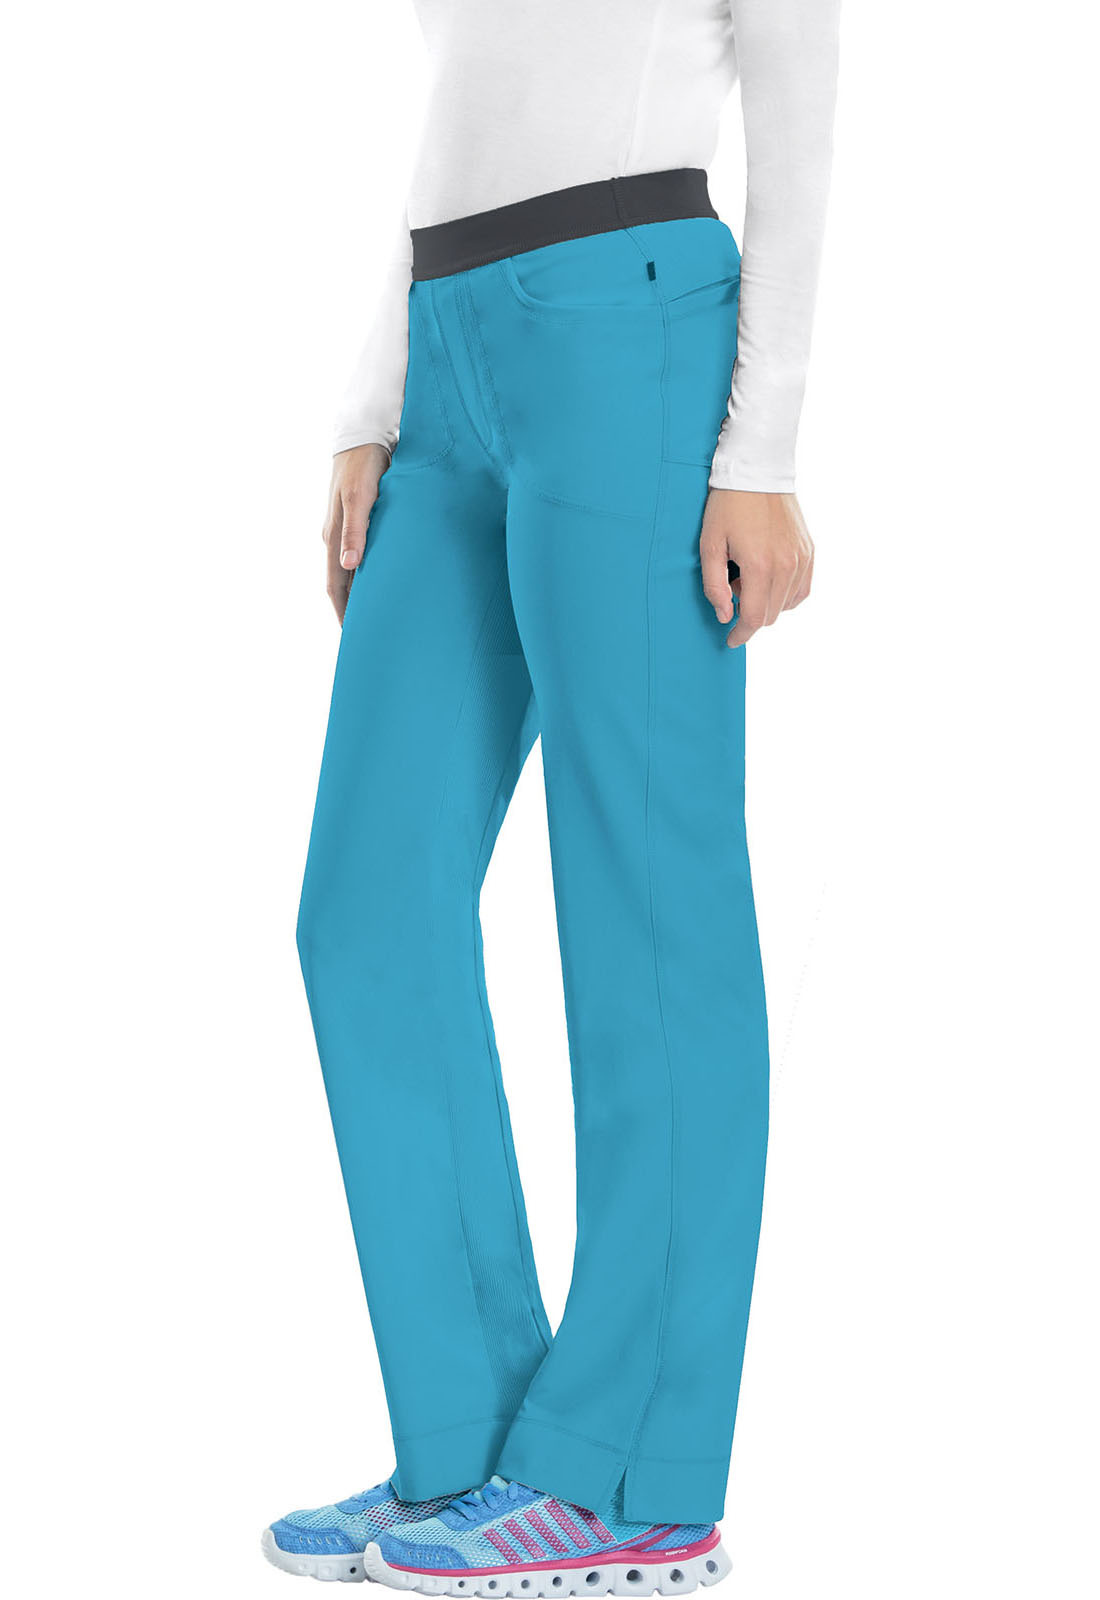 CHEROKEE Turquoise Low Rise Pull-On Women's Pants 1124A